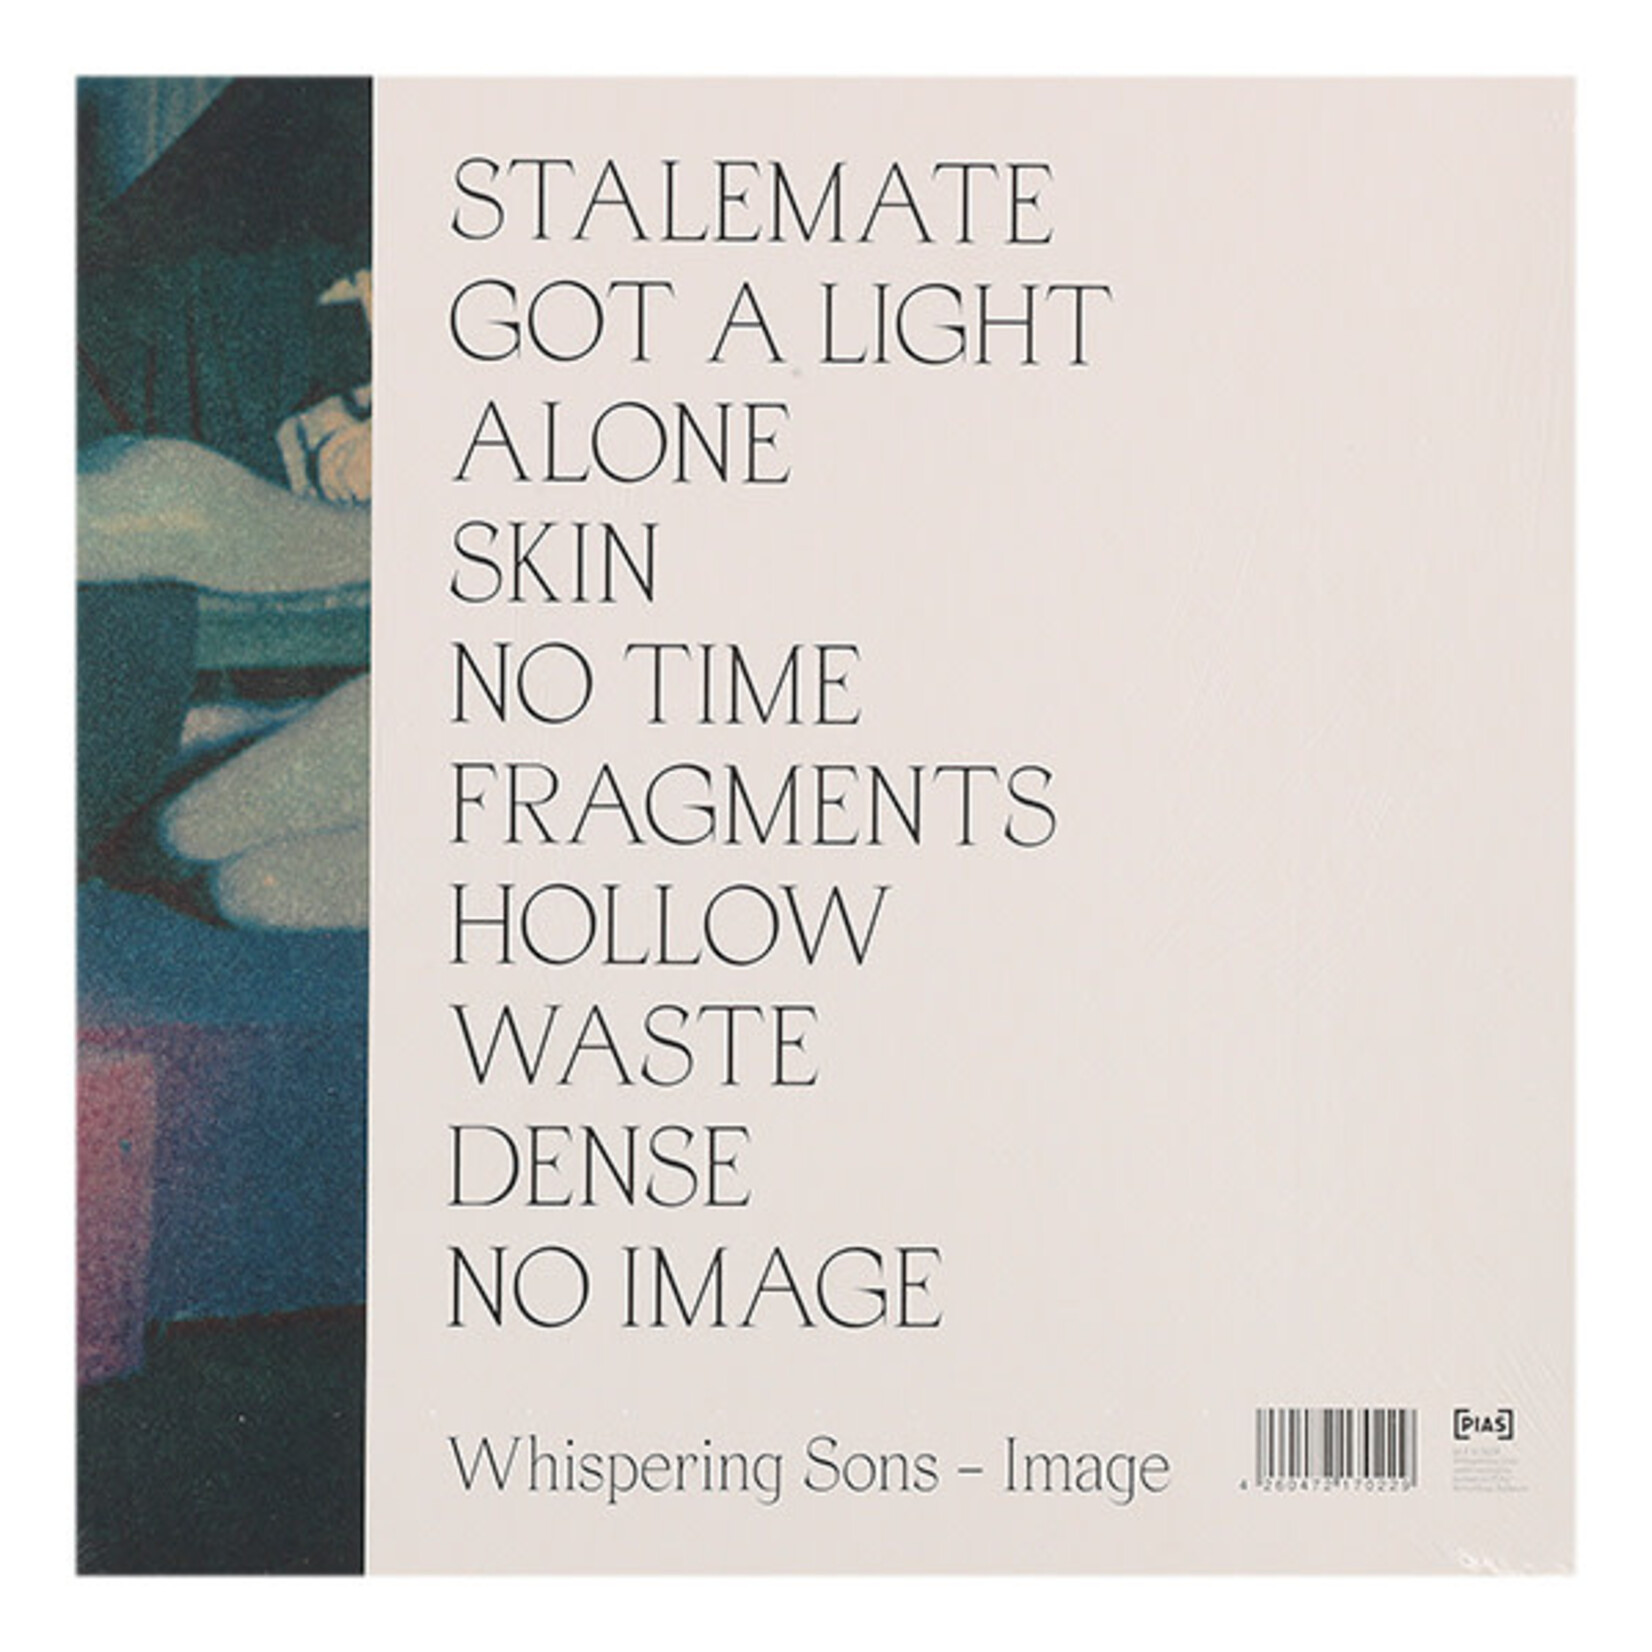 WHISPERING SONS - IMAGE - LP + DOWNLOAD CODE